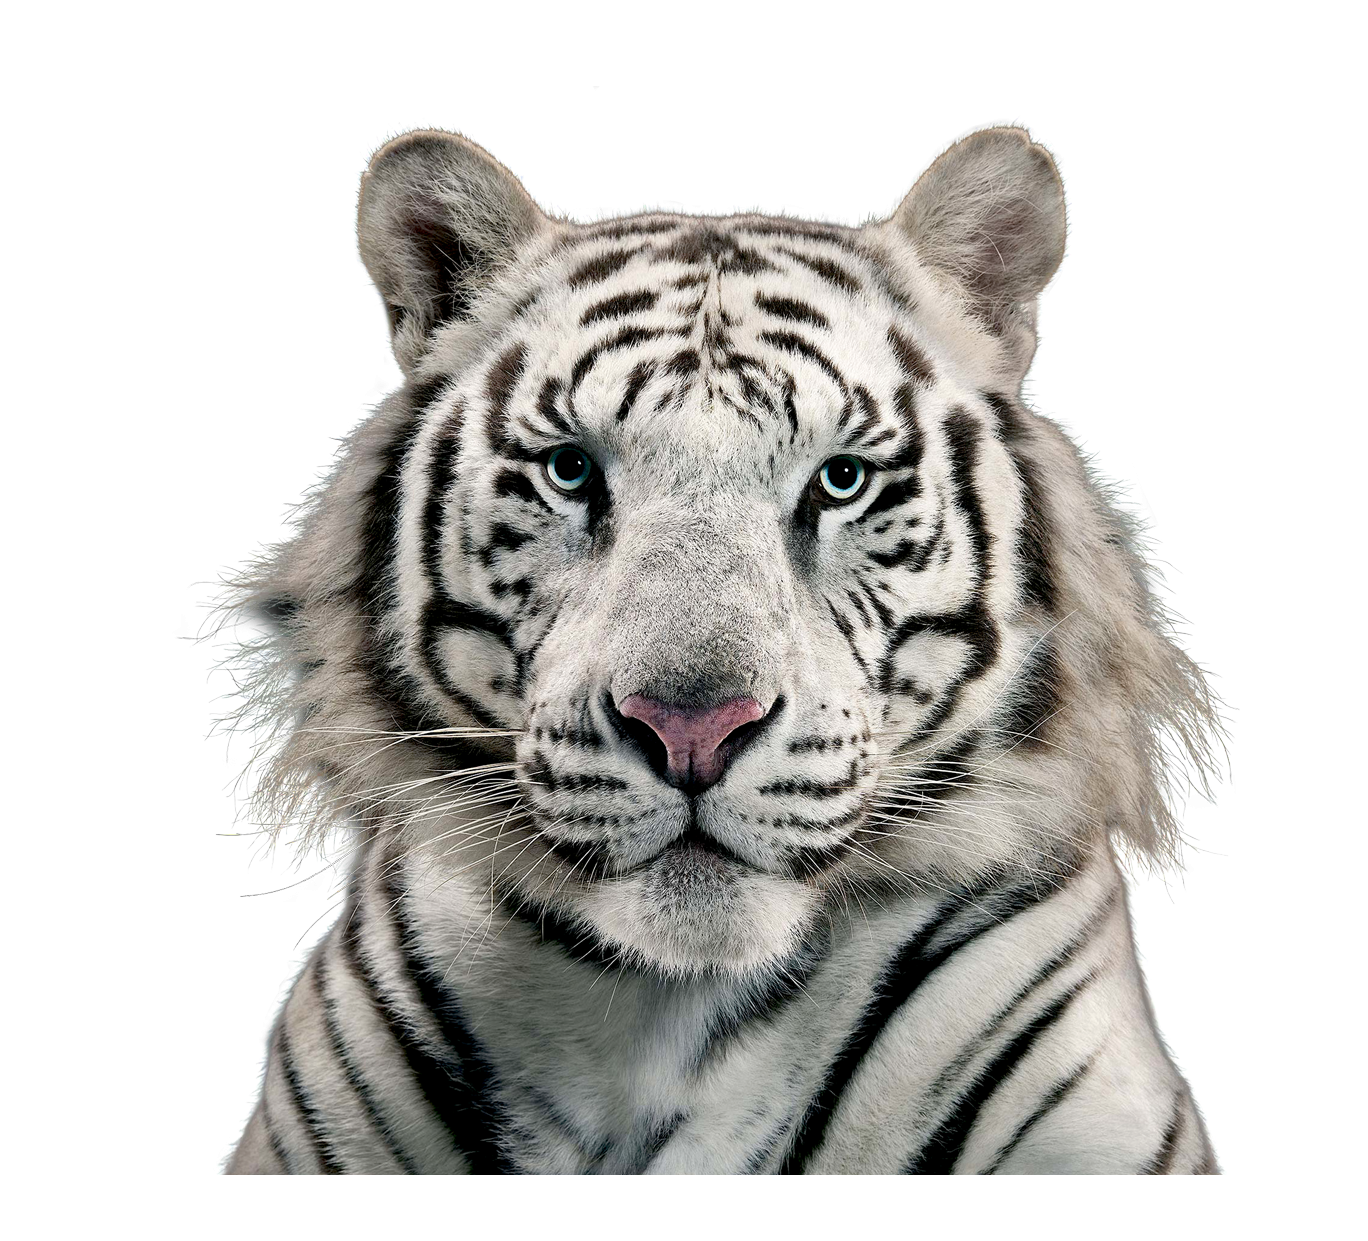 White Tiger Head PNG HQ Image Transparent - White Tiger Png